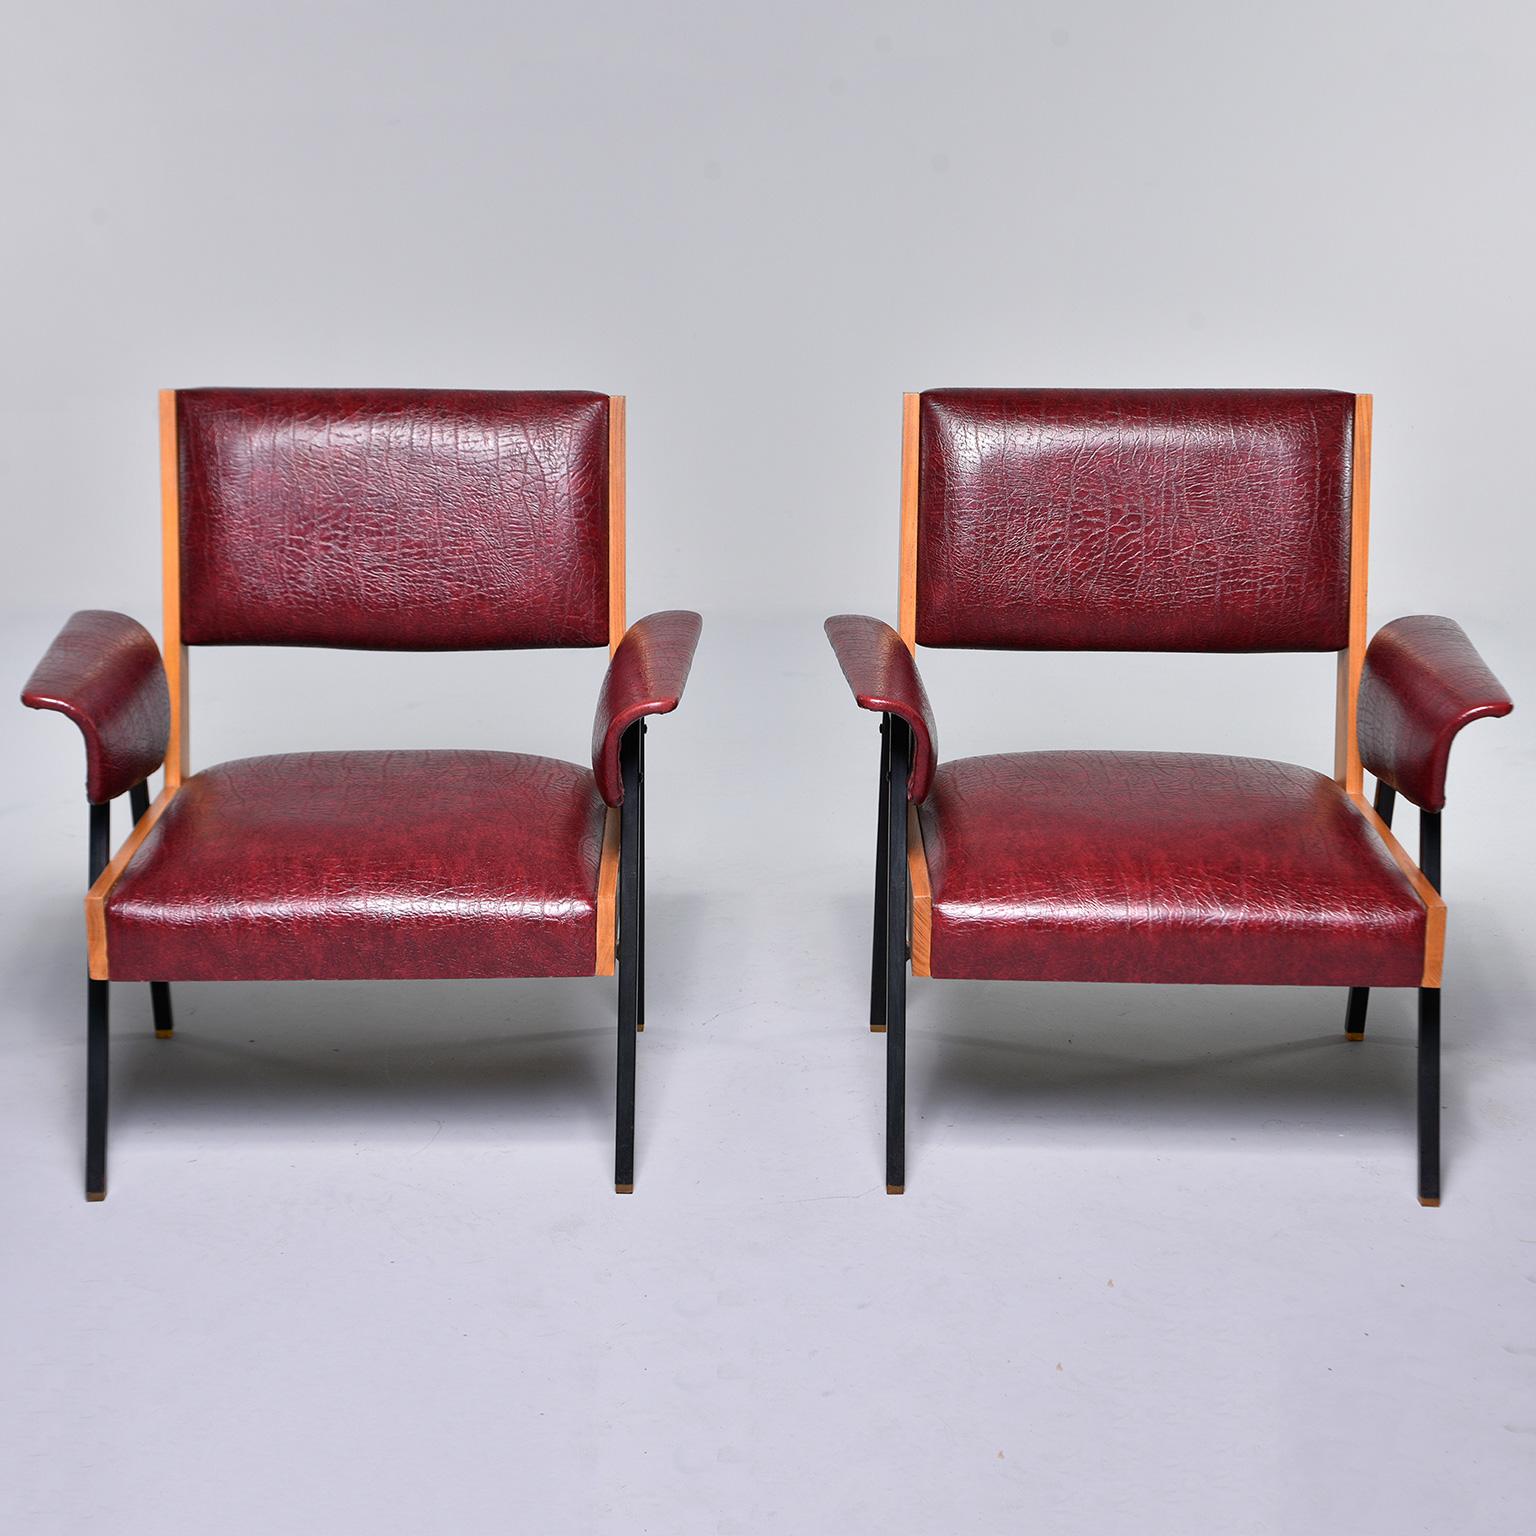 Found in Italy, this pair of circa 1960s chairs feature black metal legs, blonde wood (believed to be beech) back and side supports and bentwood armrests. Armrests, seats and backs covered in original deep red reptile-textured faux leather. 

Arm